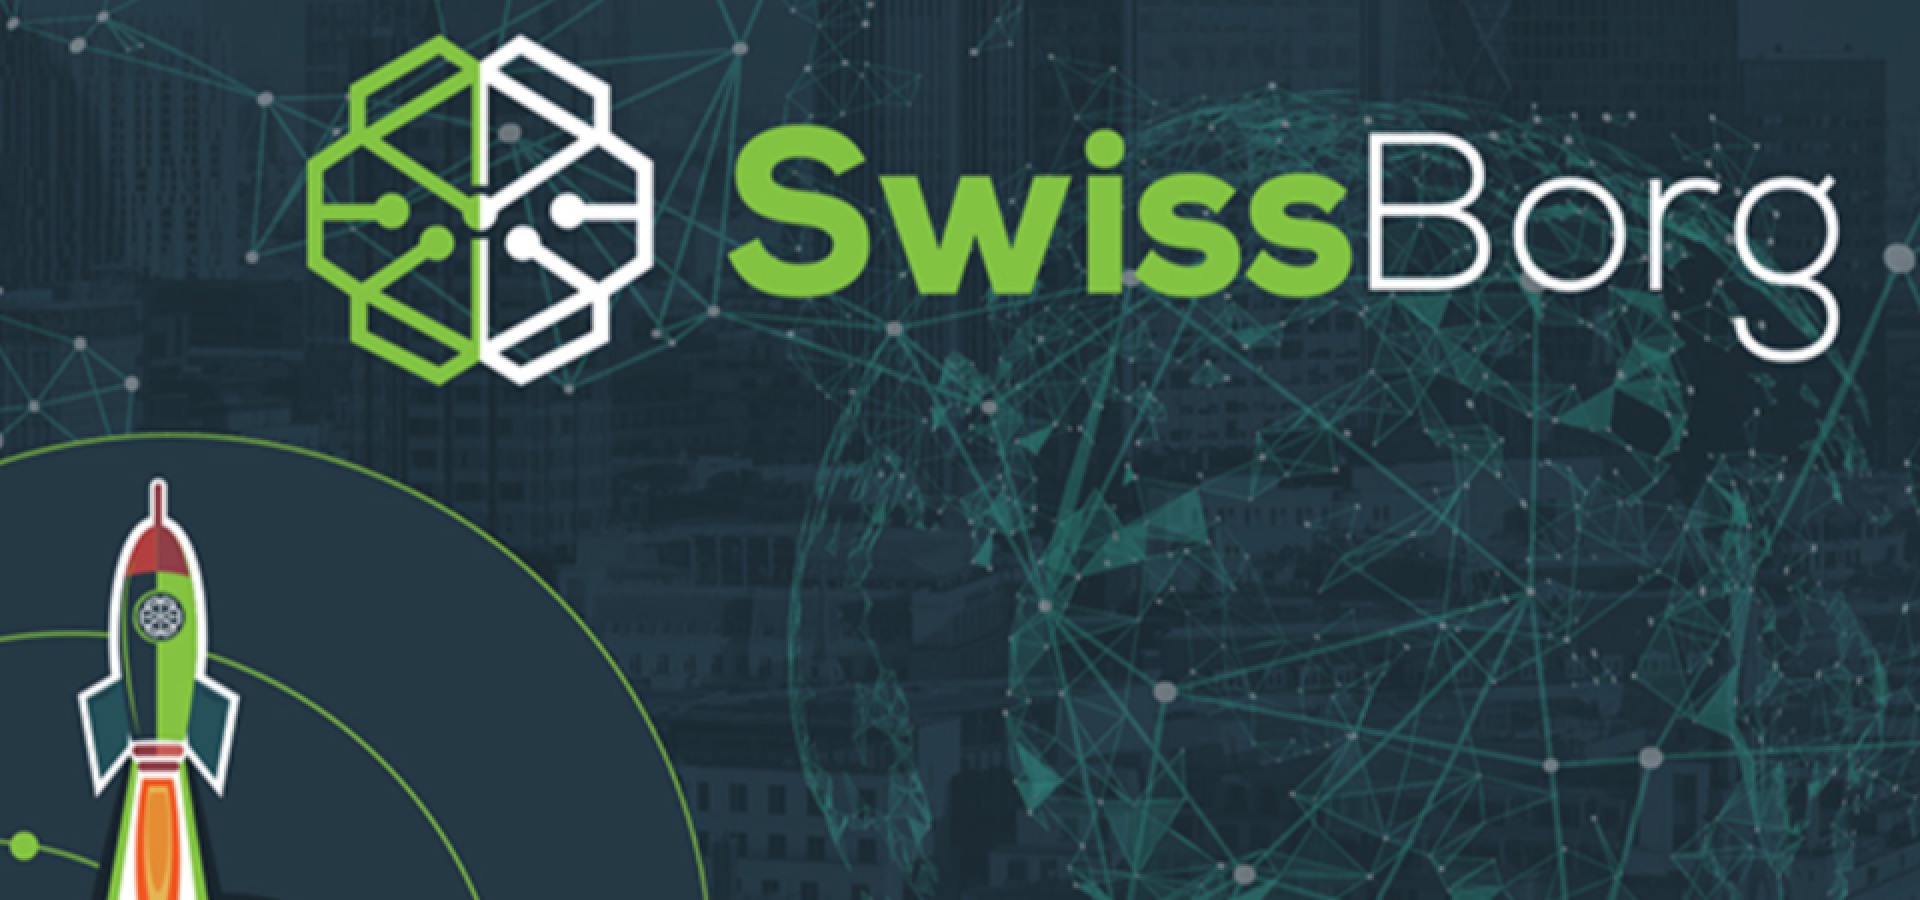 A page in the SwissBorg site.